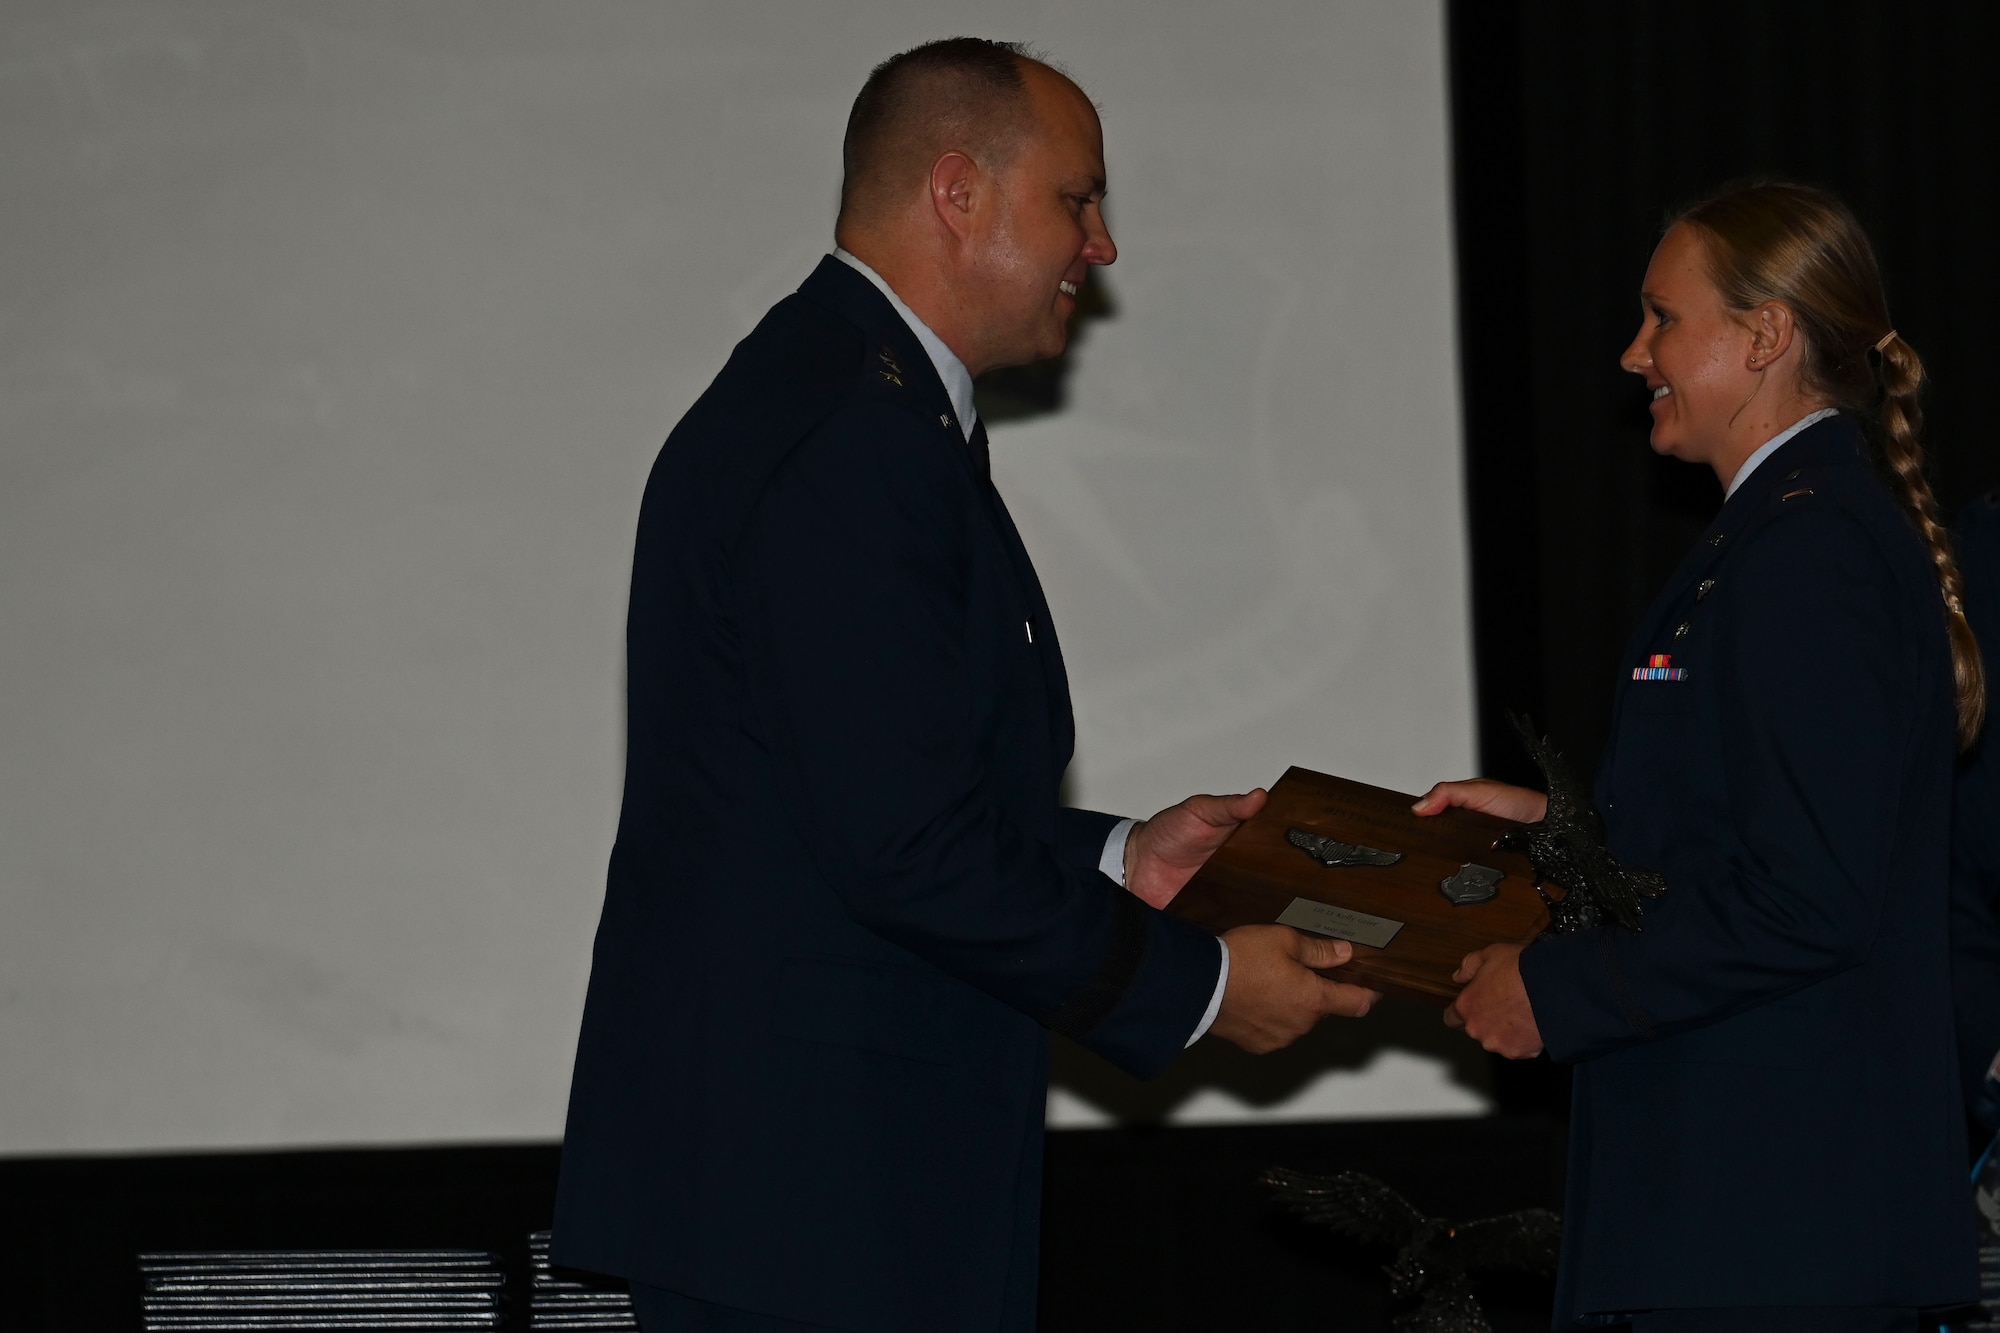 U.S. Air Force Maj. Gen. John Nichols, Global Power Programs, Office of the Assistant Secretary of the Air Force for Acquisition, Technology and Logistics, director, the Pentagon, Arlington, Virginia, presents the AETC Commander’s Trophy and Honor Graduate plaque to 1st Lt. Kelly Grier, May 26, 2022, on Columbus Air Force Base, Miss. Grier was one of three graduates recognized for excelling in both academics and leadership. (U.S. Air Force photo by Airman 1st Class Jessica Haynie)